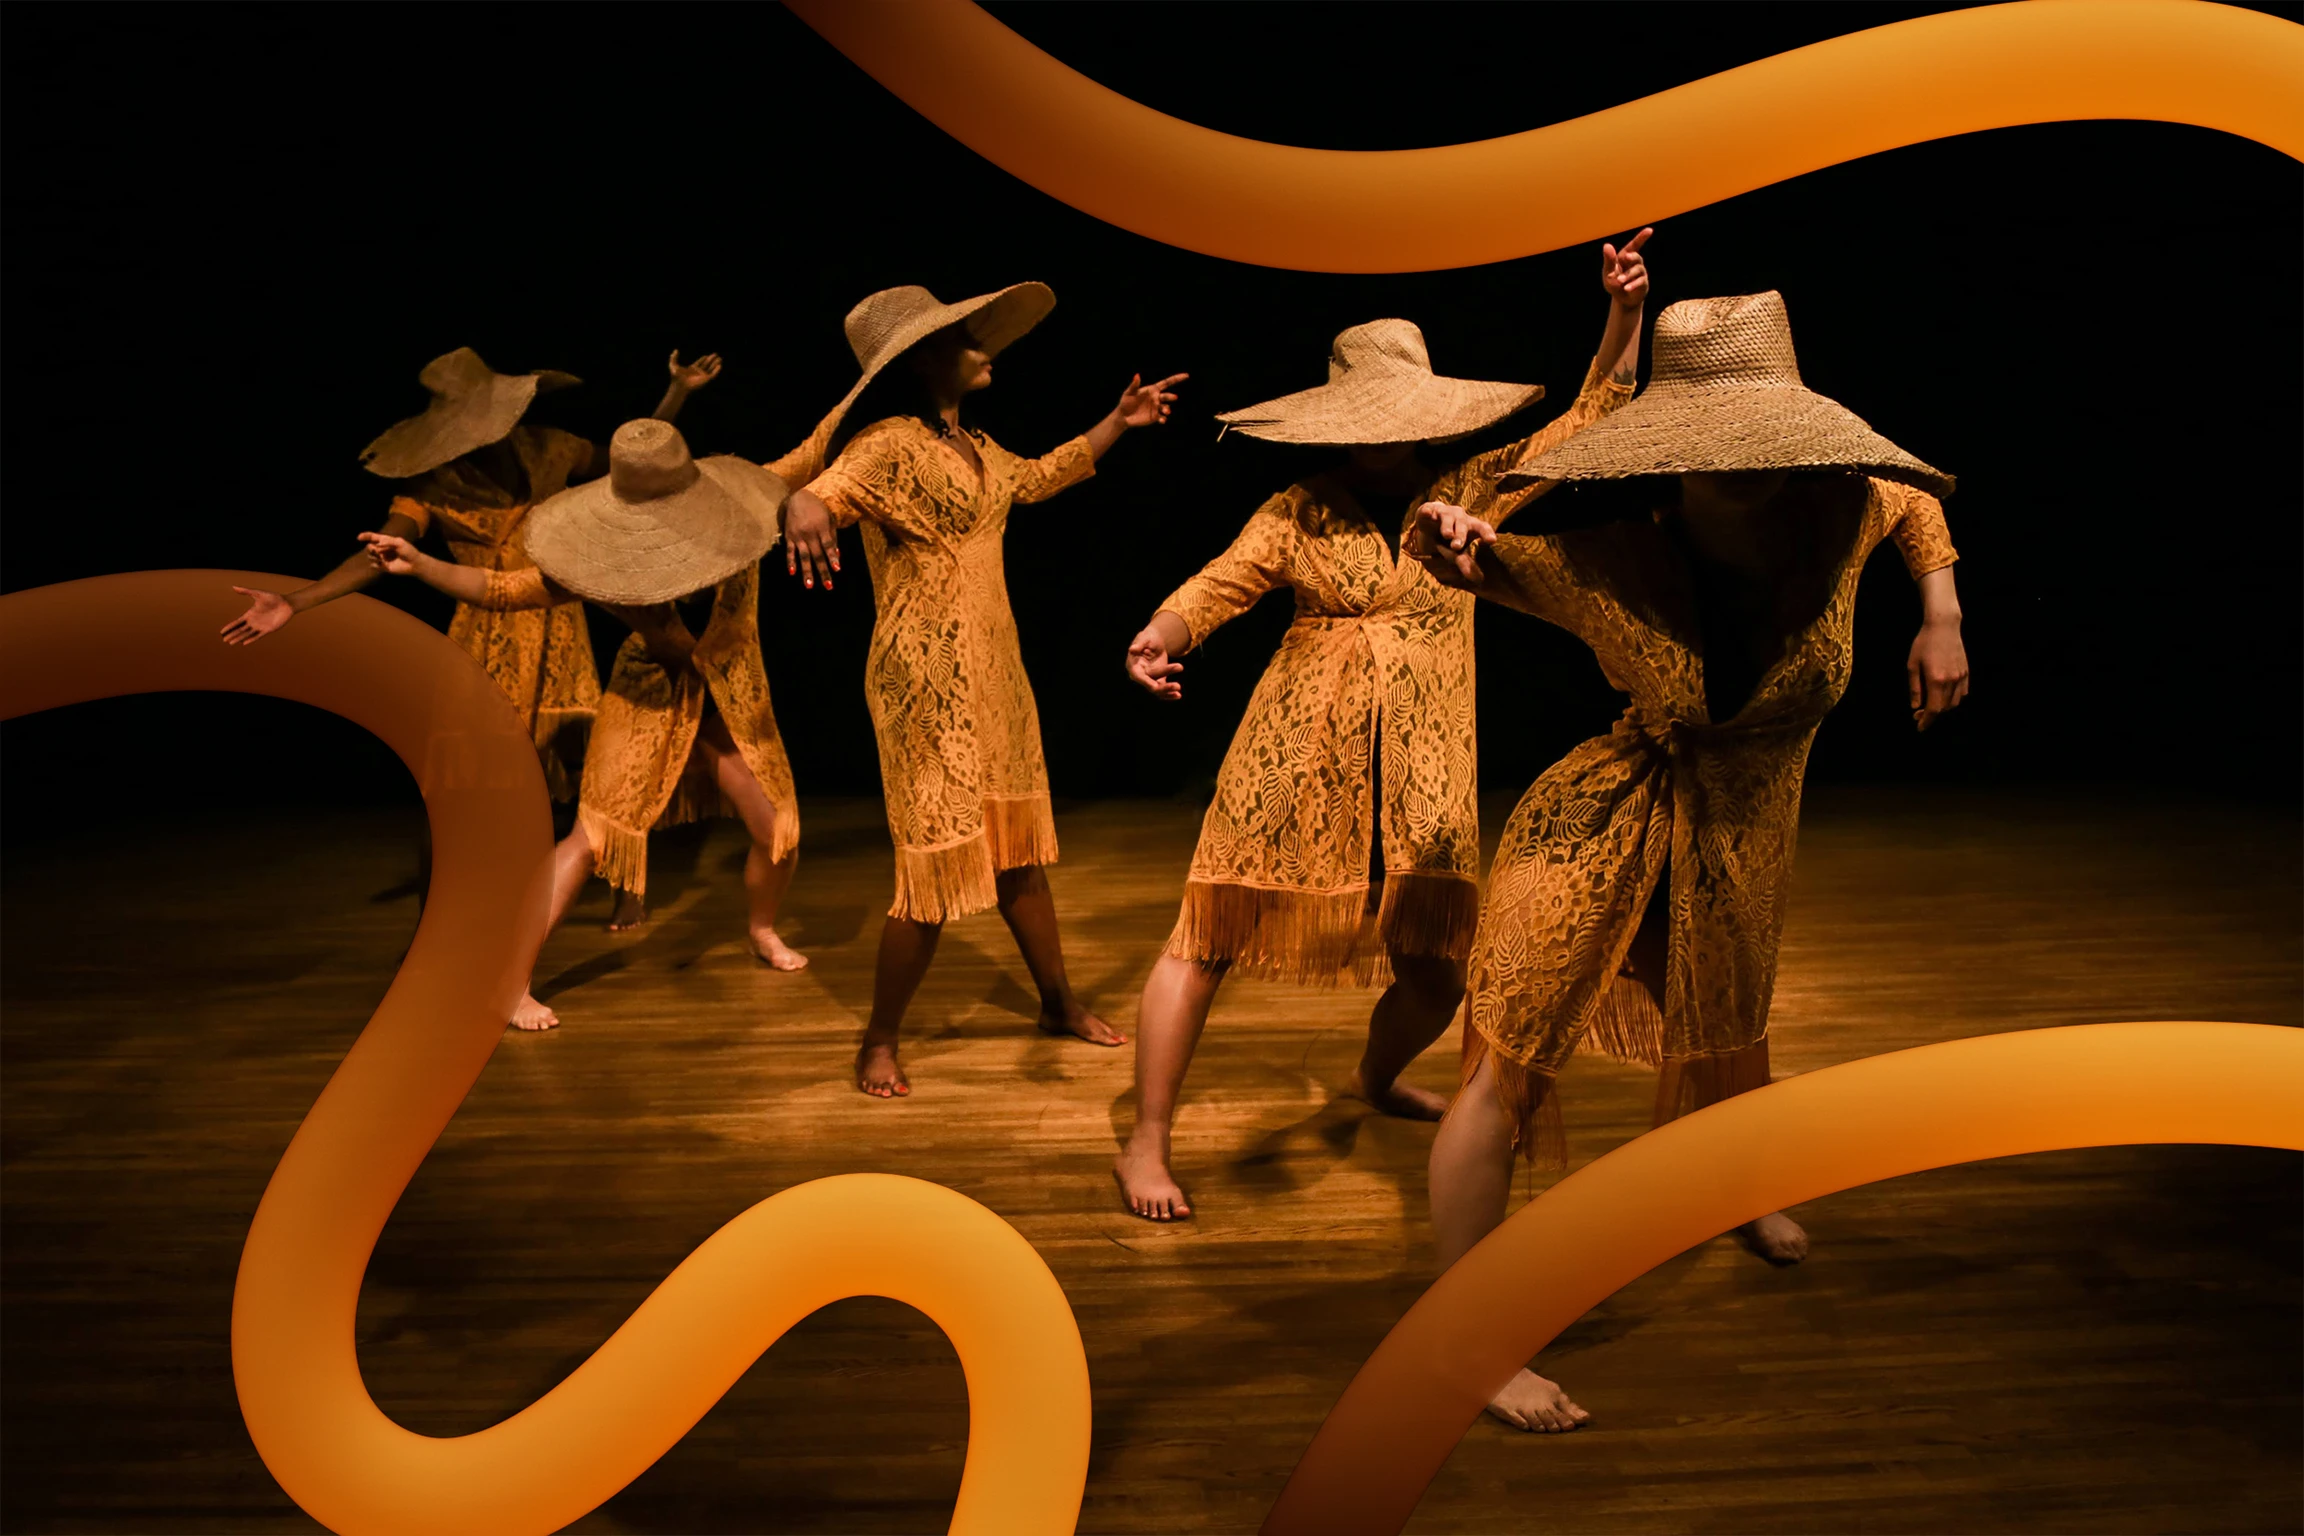 Five dancers wearing large hats are in various movements